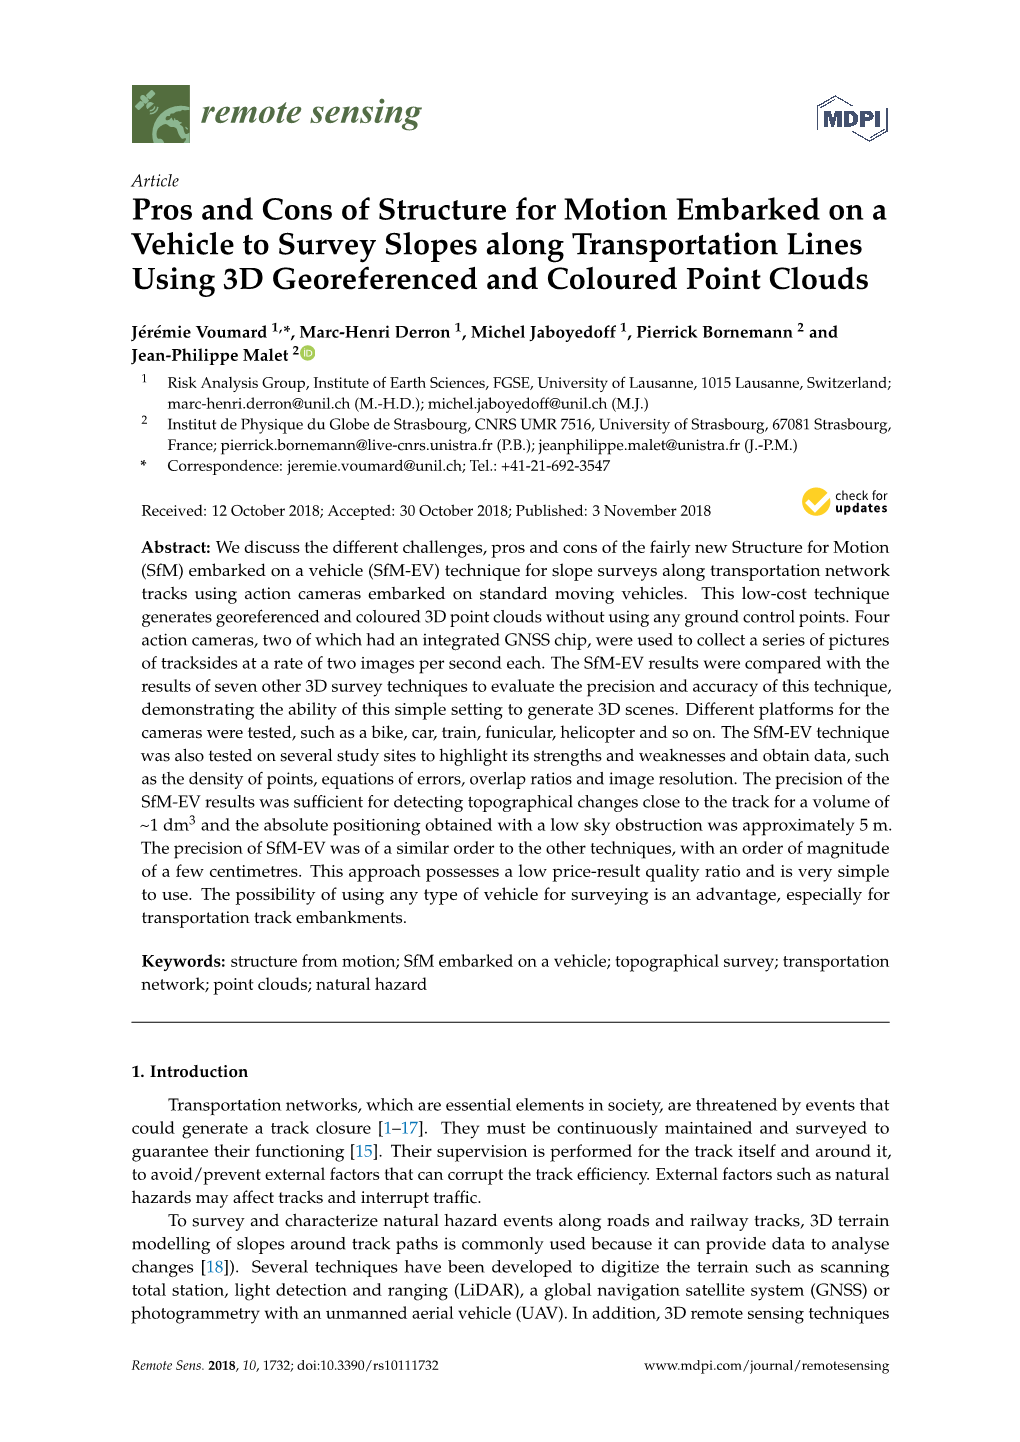 Pros and Cons of Structure for Motion Embarked on a Vehicle to Survey Slopes Along Transportation Lines Using 3D Georeferenced and Coloured Point Clouds